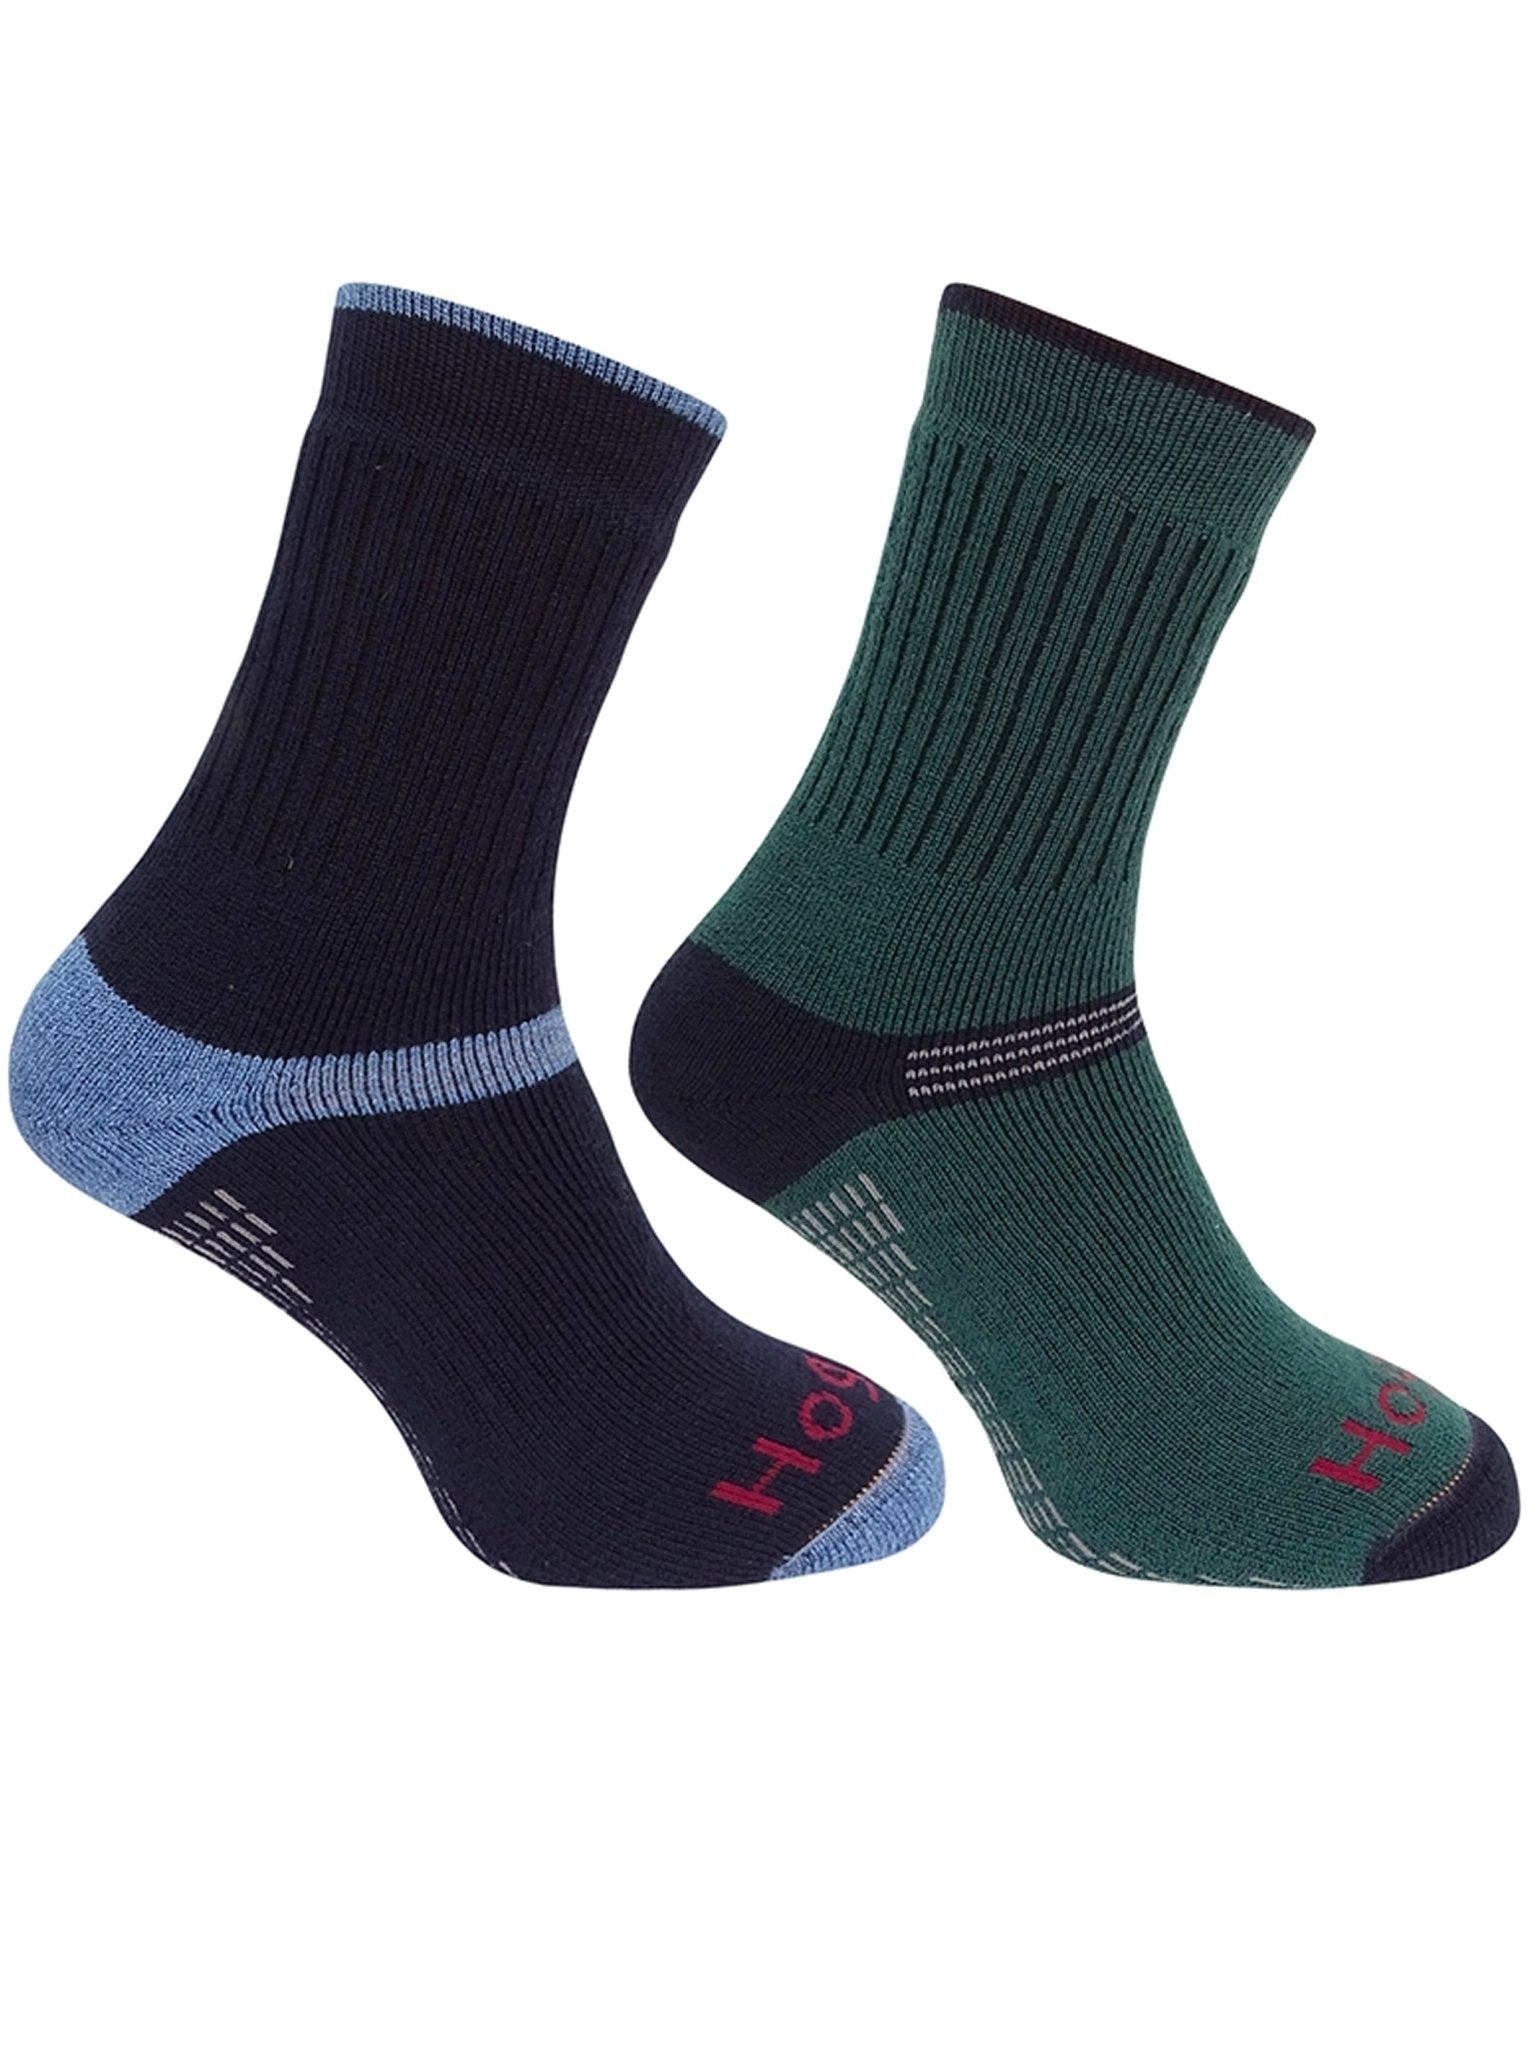 4elementsclothingHoggs of FifeHoggs of Fife - 1905 Mens Socks in Charcoal/Denim (Twin Pack) - Tech ActiveSocks1905/GN/1